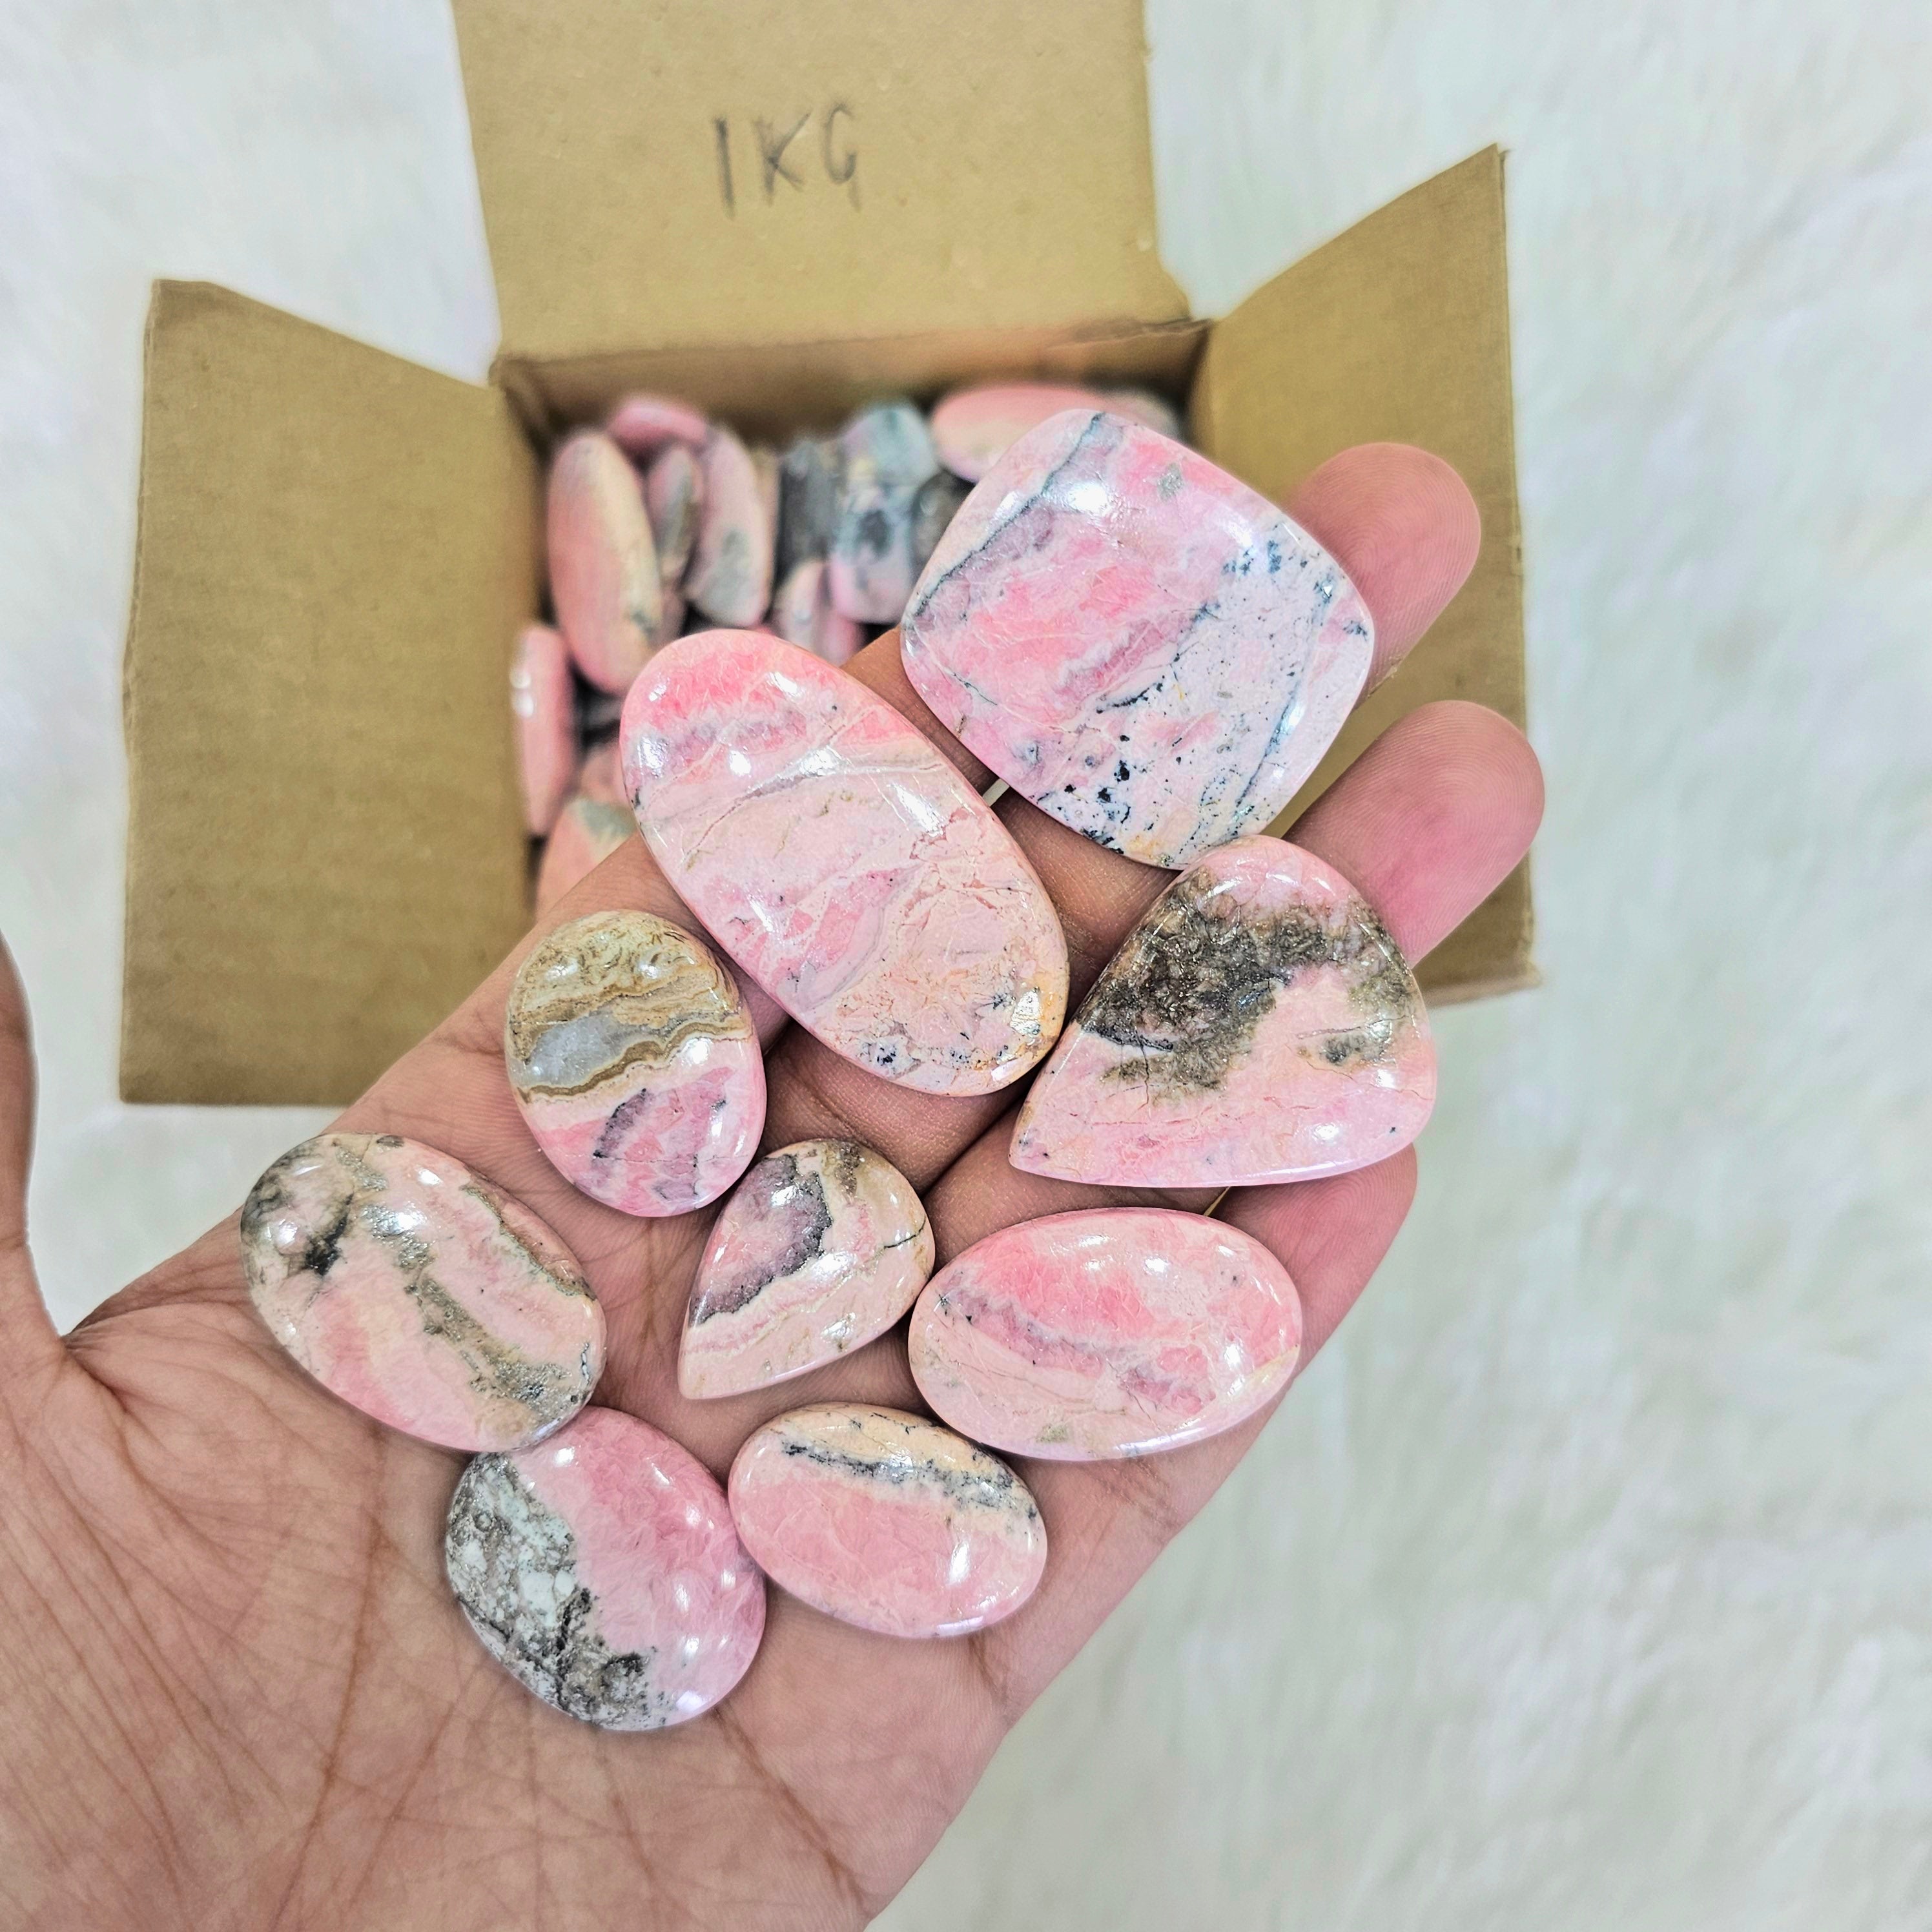 1 KG Natural Pink Rhodochrosite Cabochons | 1" Inches to 3 Inches - The LabradoriteKing